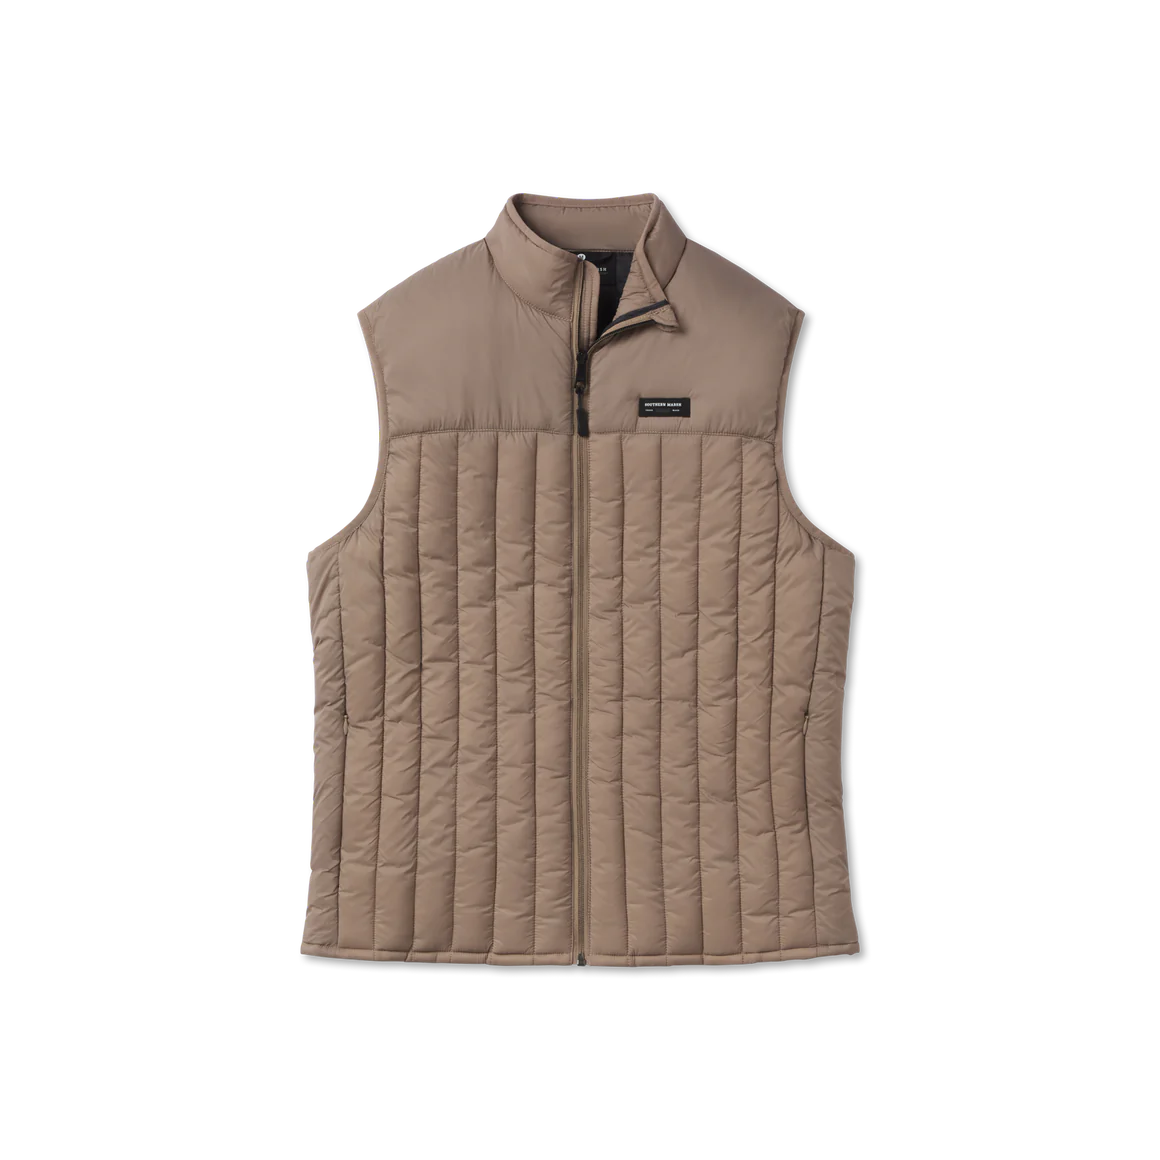 Southern Marsh Flathead Performance Quilted Vest